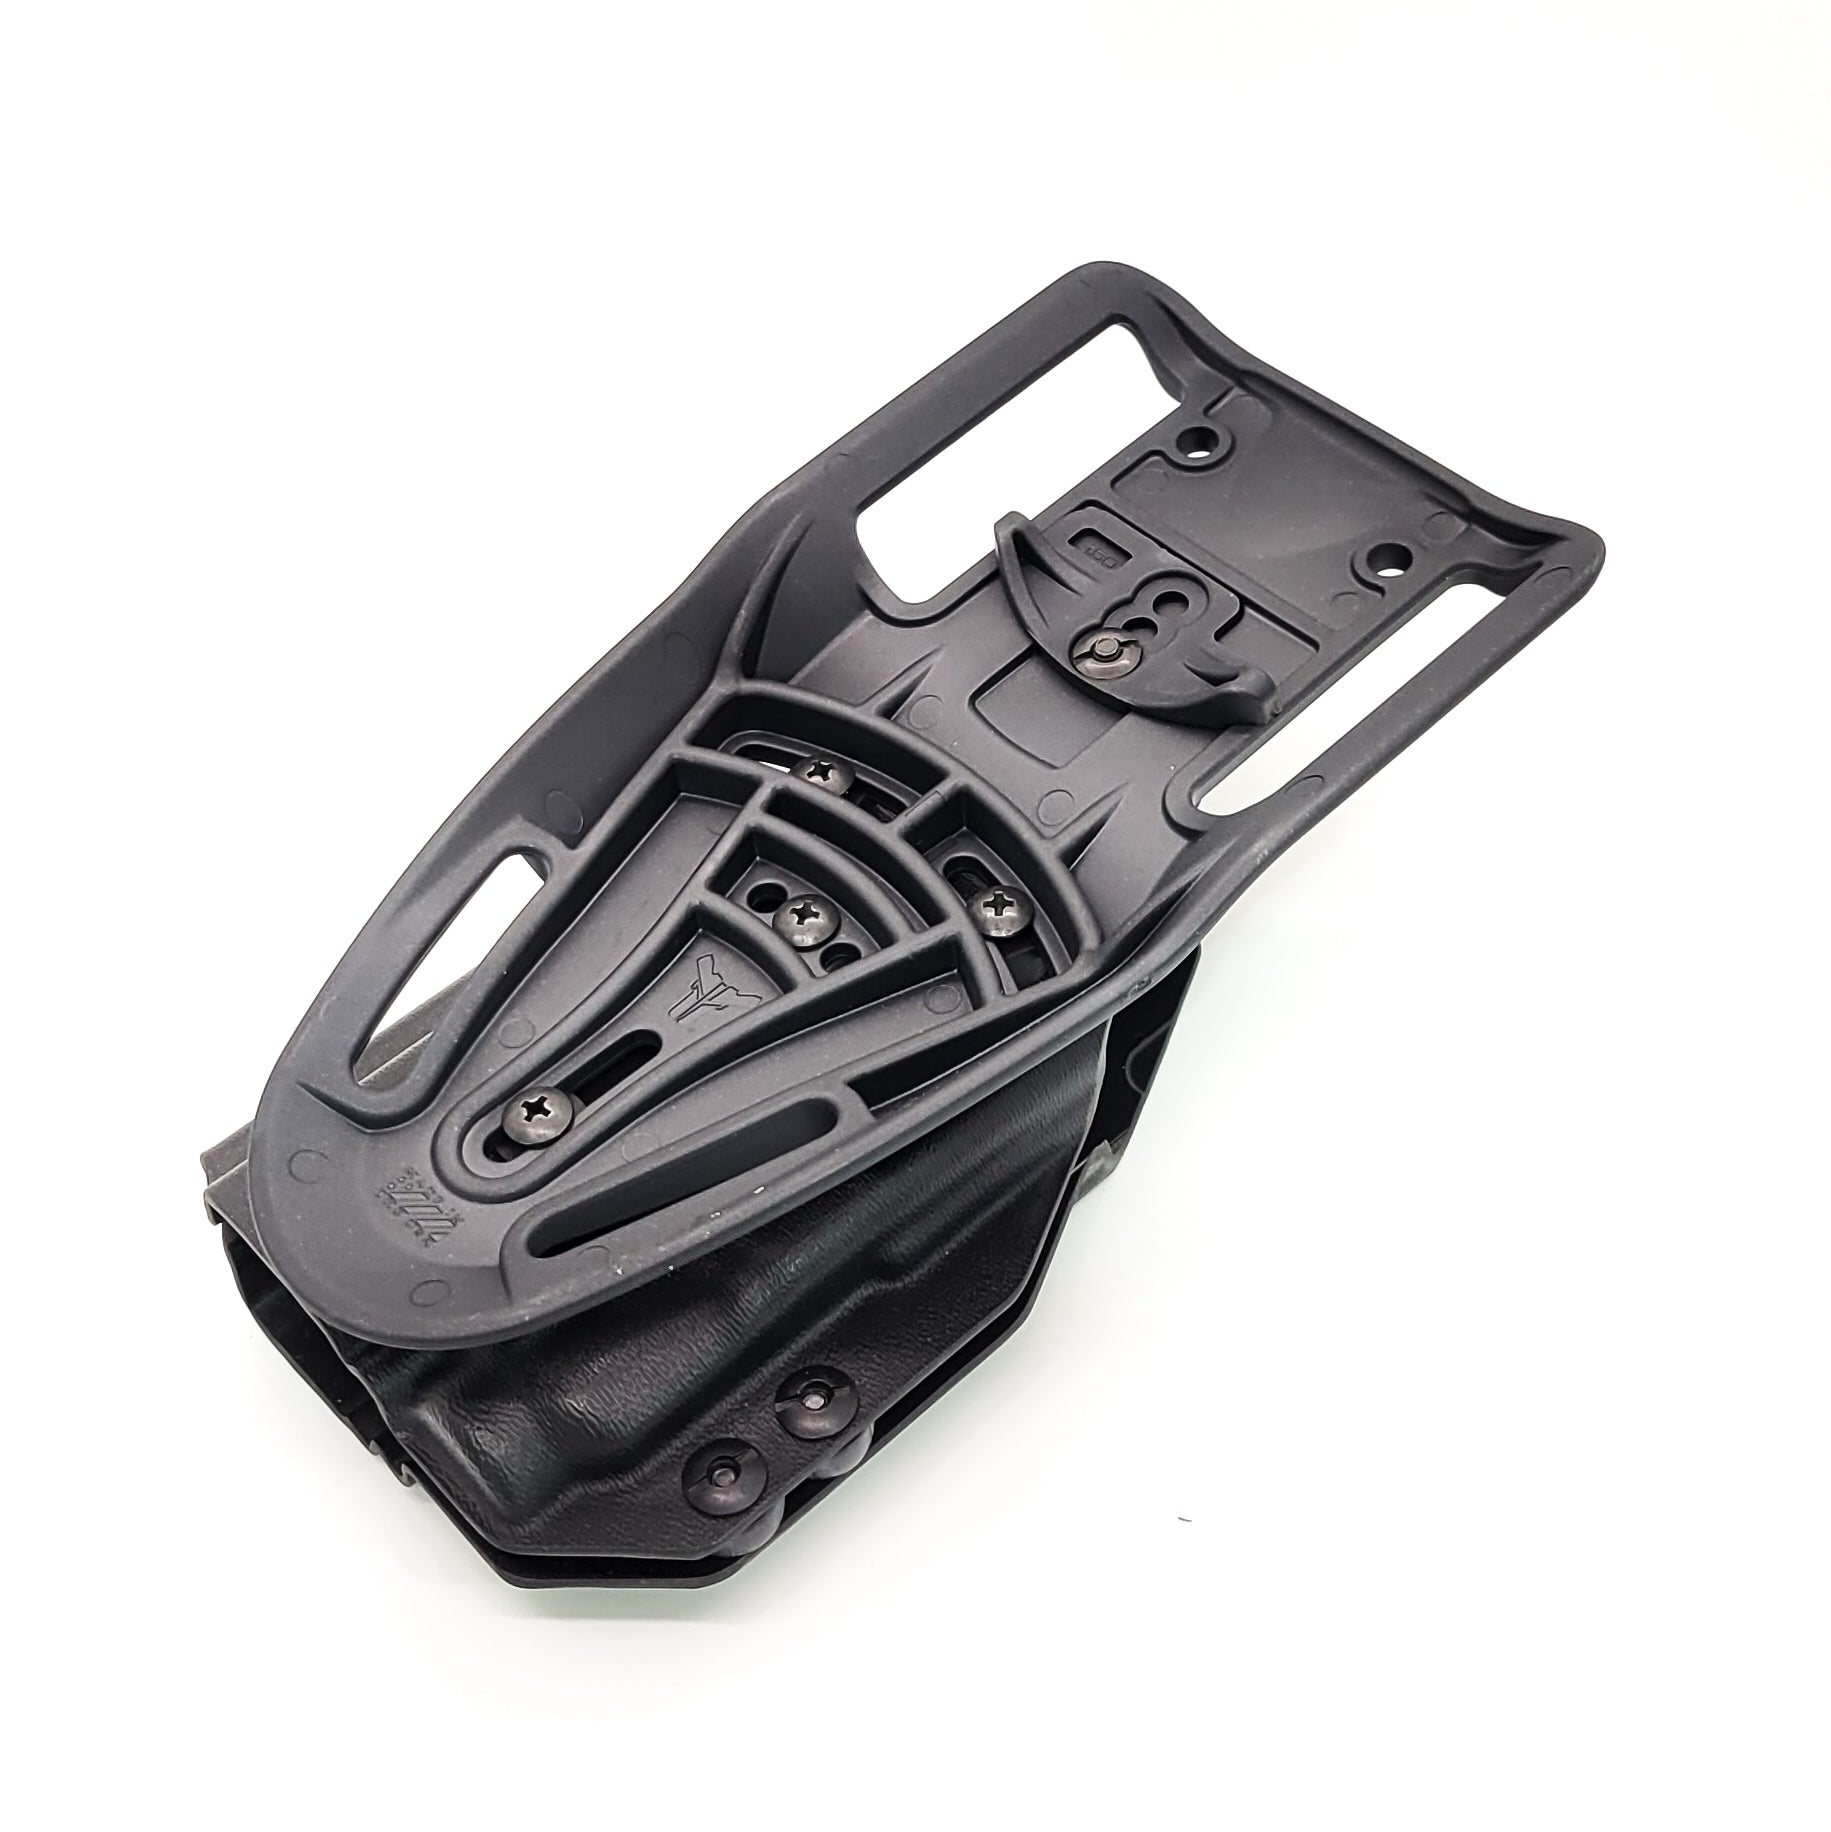 For the best outside waistband OWB Kydex duty or competition style holster designed to fit the Walther PDP 4" Compact pistol with the Streamlight TLR-7A or TLR-7 mounted on the firearm, shop Four Brothers Holsters. Cut for red dot sights, adjustable retention, and open muzzle for threaded barrel or compensator